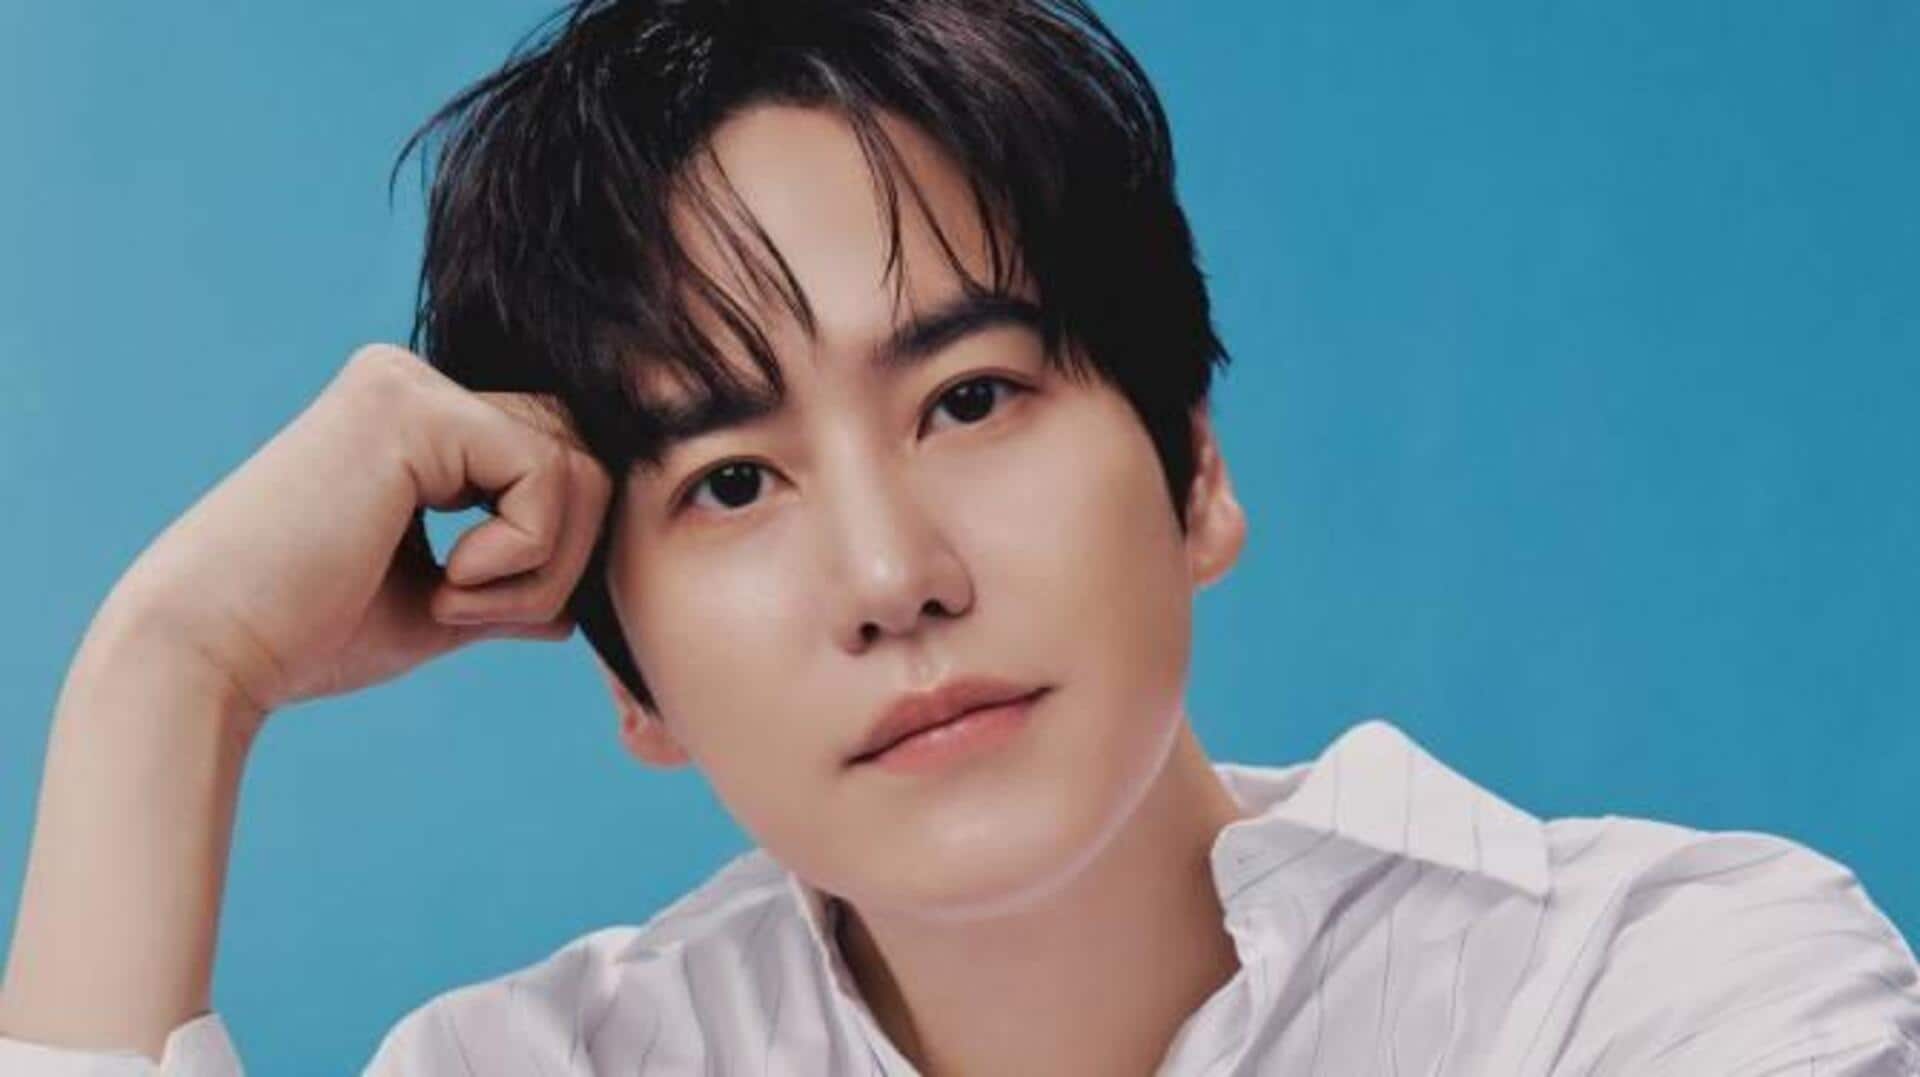 Kyuhyun's agency issues statement against impersonators, warns fans